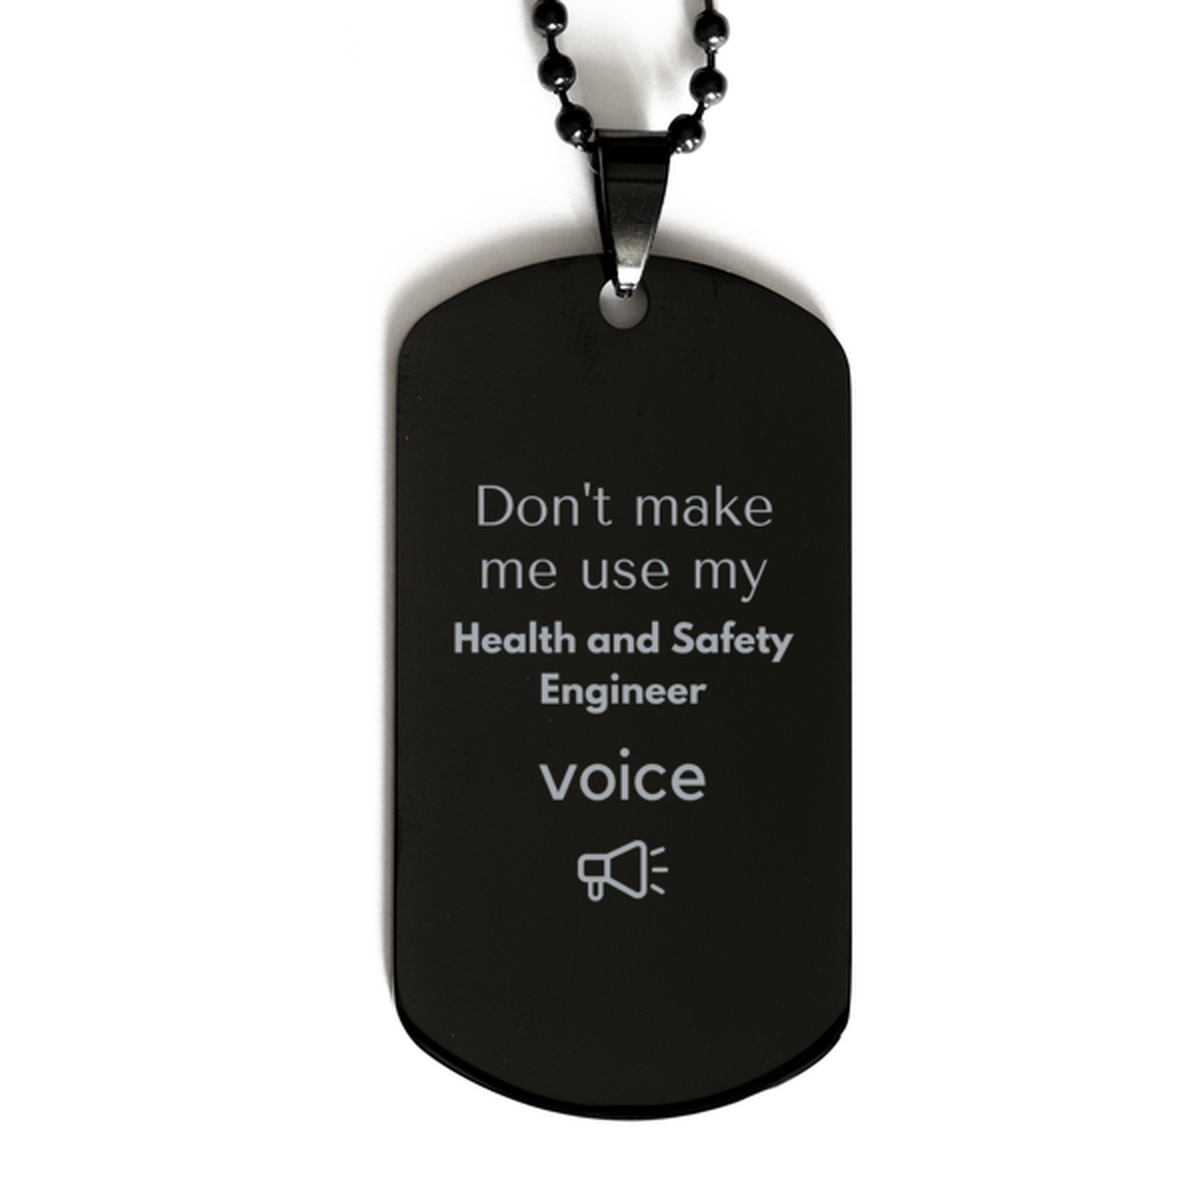 Don't make me use my Health and Safety Engineer voice, Sarcasm Health and Safety Engineer Gifts, Christmas Health and Safety Engineer Black Dog Tag Birthday Unique Gifts For Health and Safety Engineer Coworkers, Men, Women, Colleague, Friends